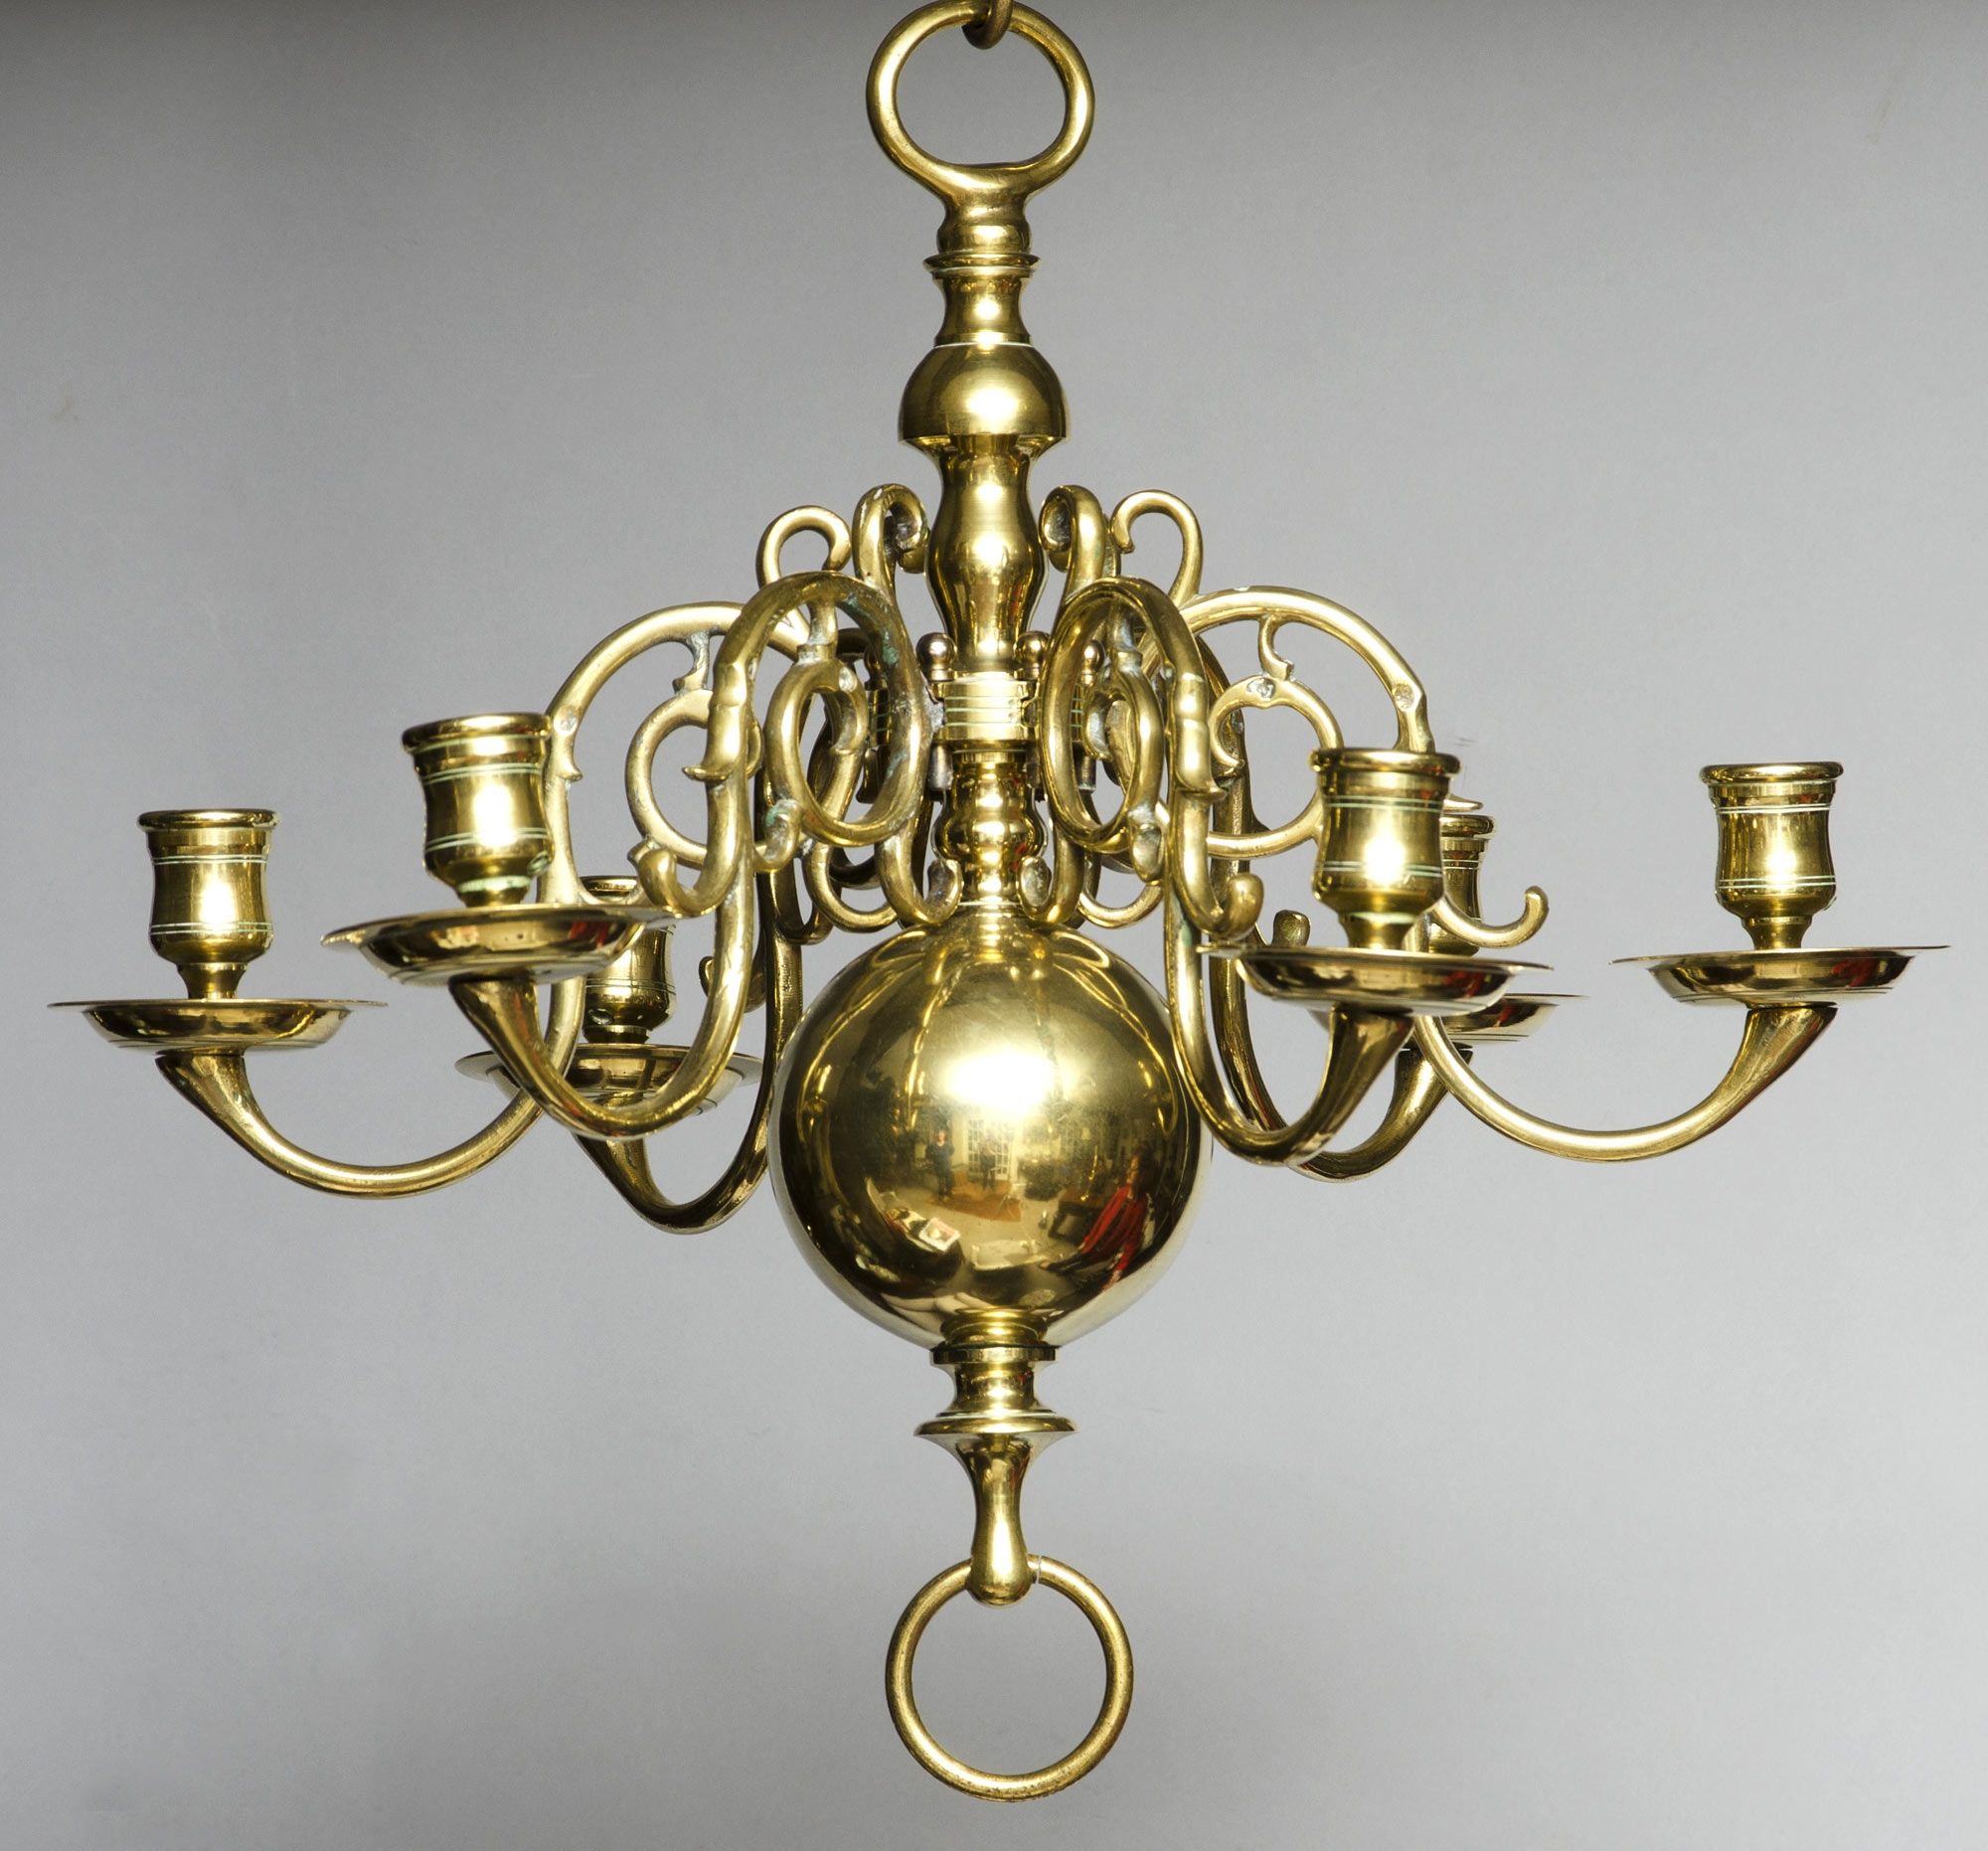 Product Small Dutch Brass Chandelier Pertaining To Brass Chandeliers (View 6 of 12)